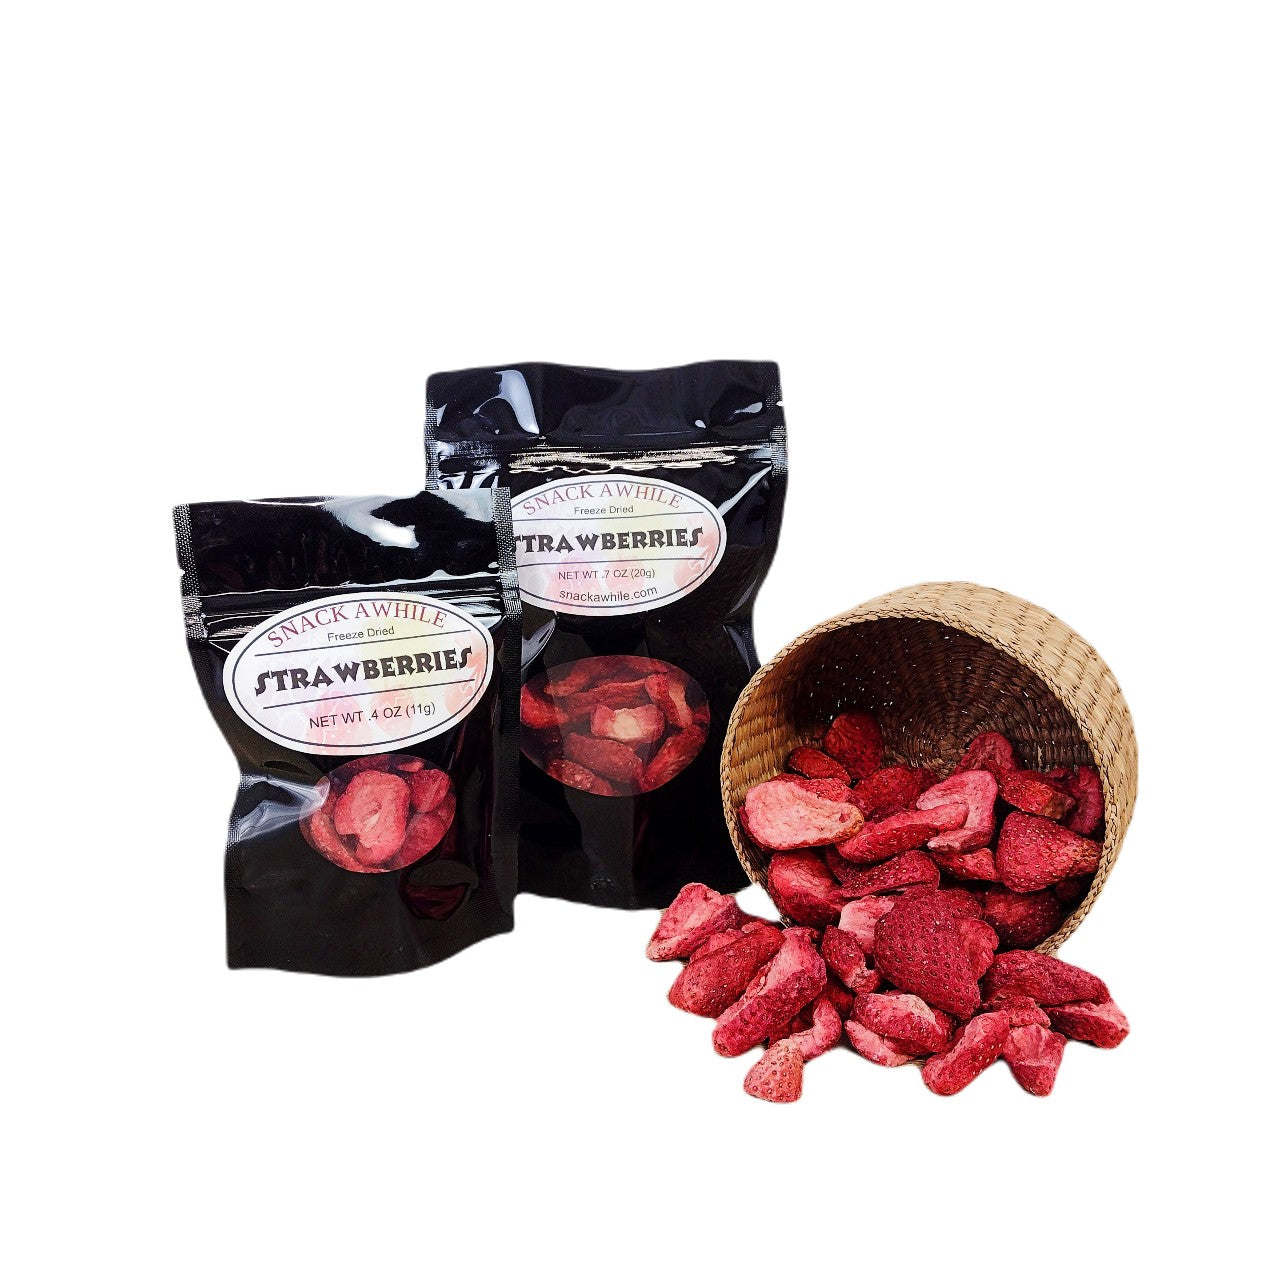 Snack Awhile Freeze Dried Strawberries